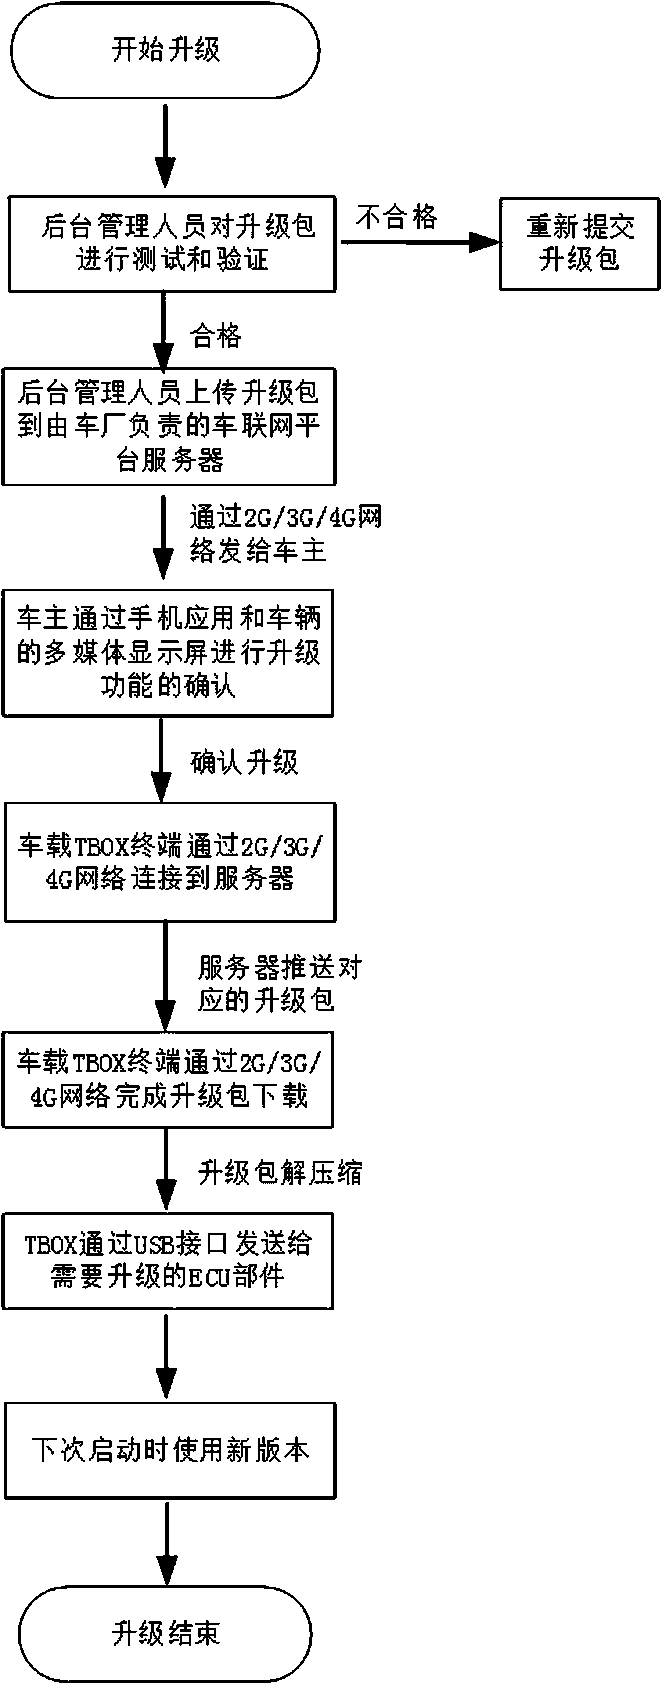 Internet-of-Vehicles terminal supporting upgrade of other ECUs (Electronic Control Unit) by FOTA (Firmware Over-The-Air) and implementation method